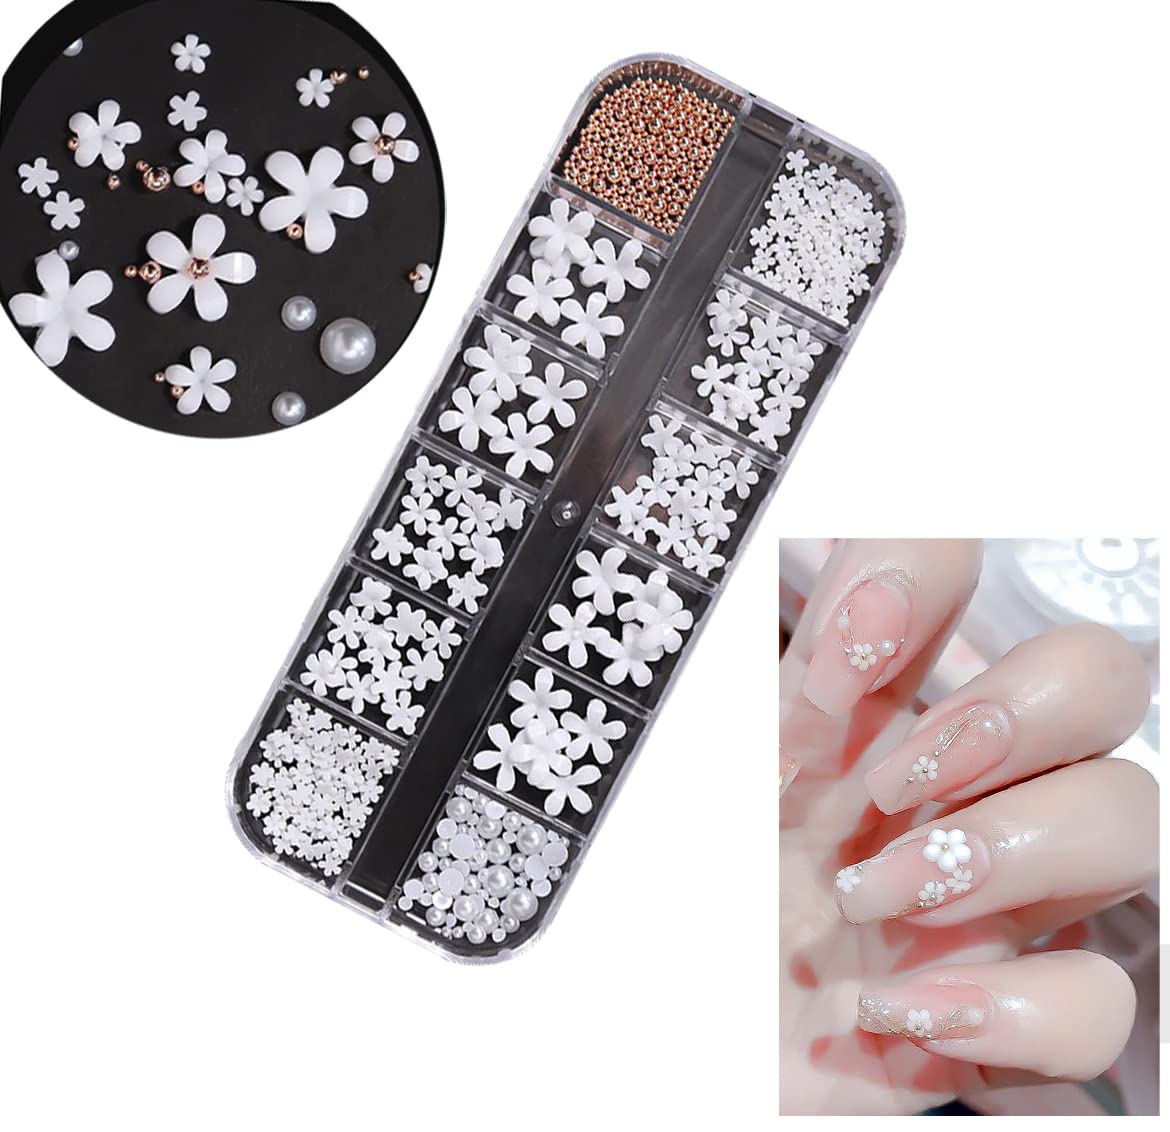 DIY Nail Art Decorations Palette Resin Five Petal White Flowers, Rose Gold Caviar Steel Beads, Mix Pearls Nail Art Accessories For Manicure